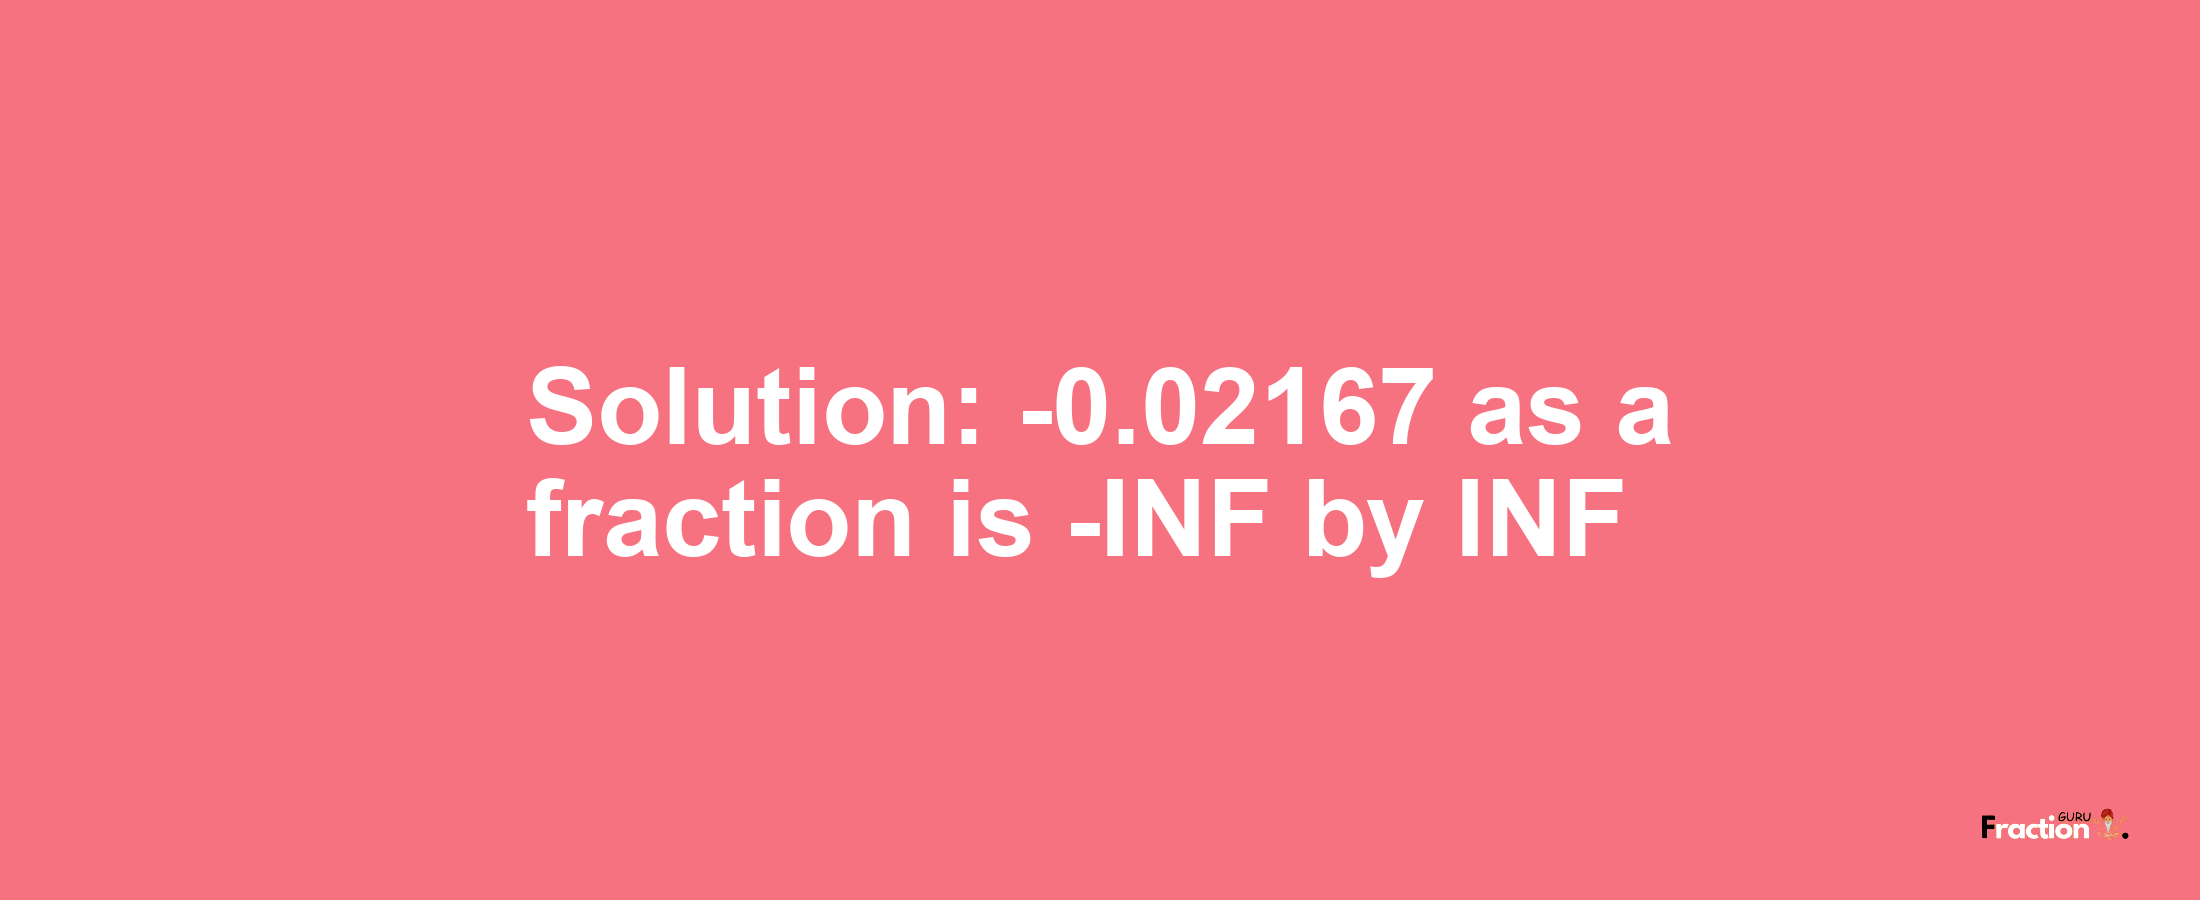 Solution:-0.02167 as a fraction is -INF/INF